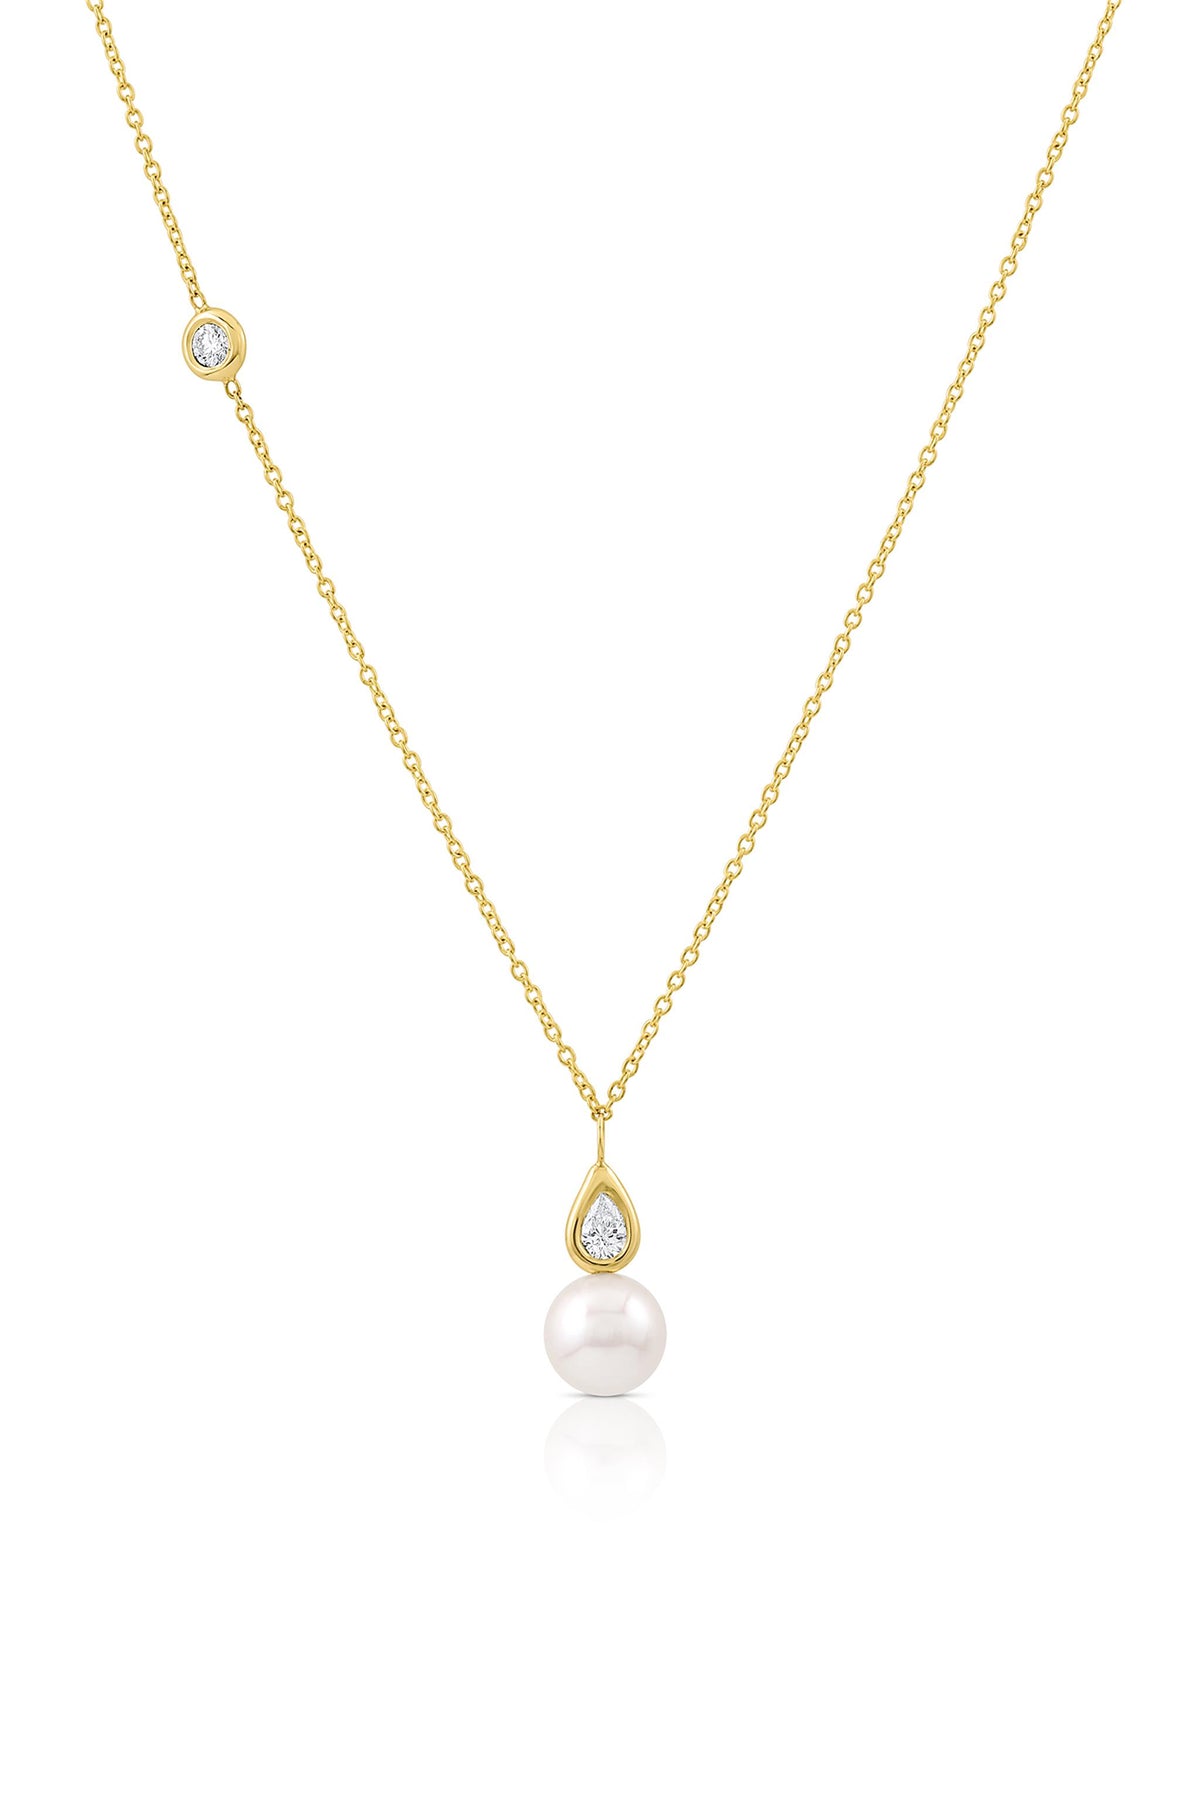 14Kt Yellow Gold Drop Pendant With 7mm Akoya Cultured Pearl and Pear Shaped Diamond